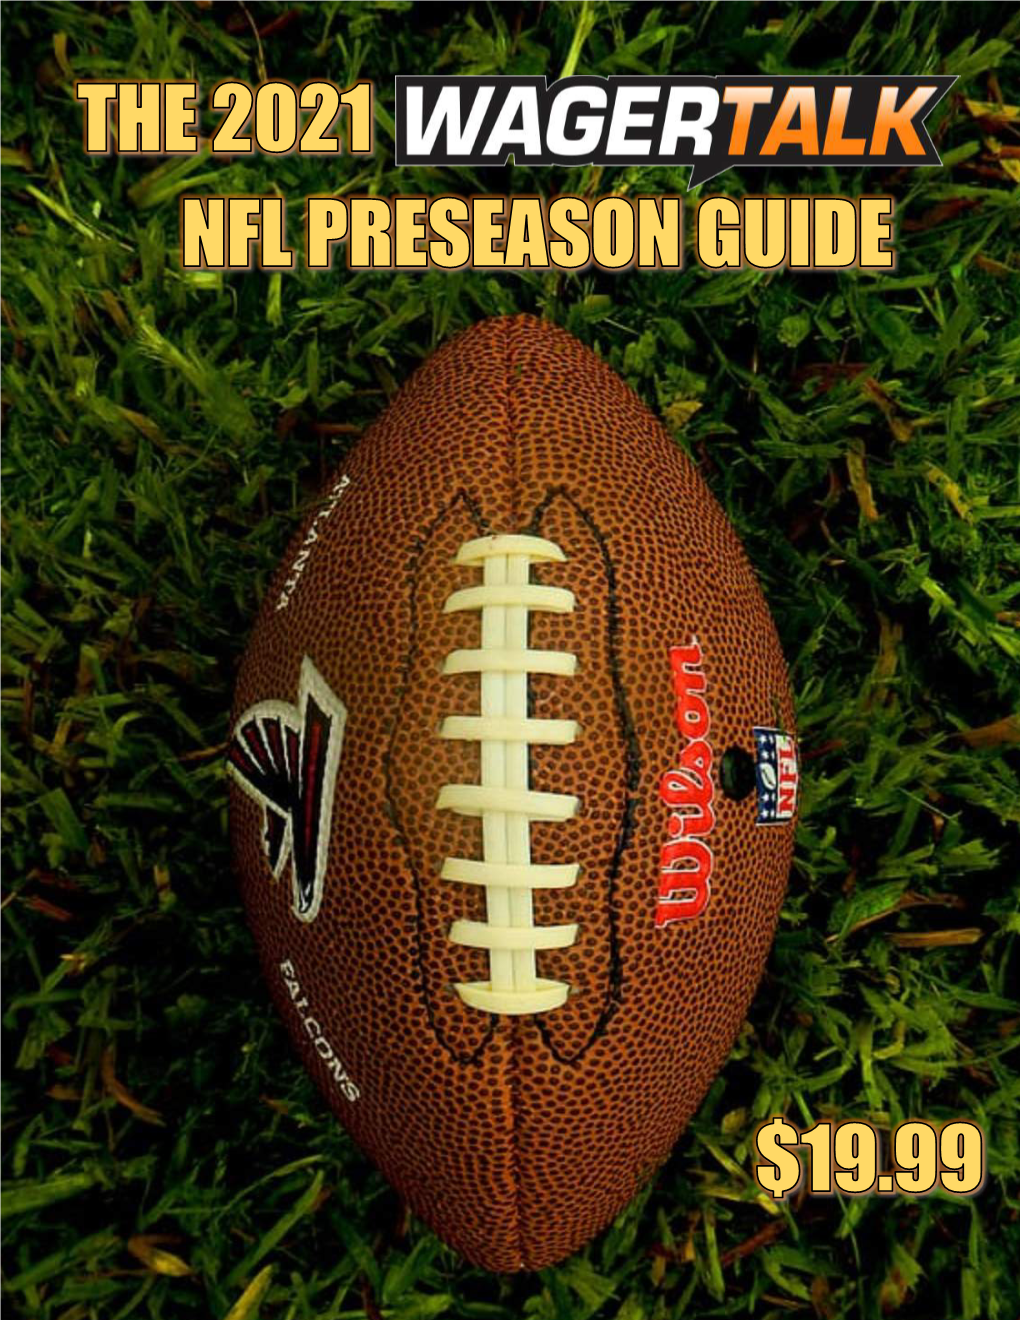 Get Your Free Preseason Guide Here